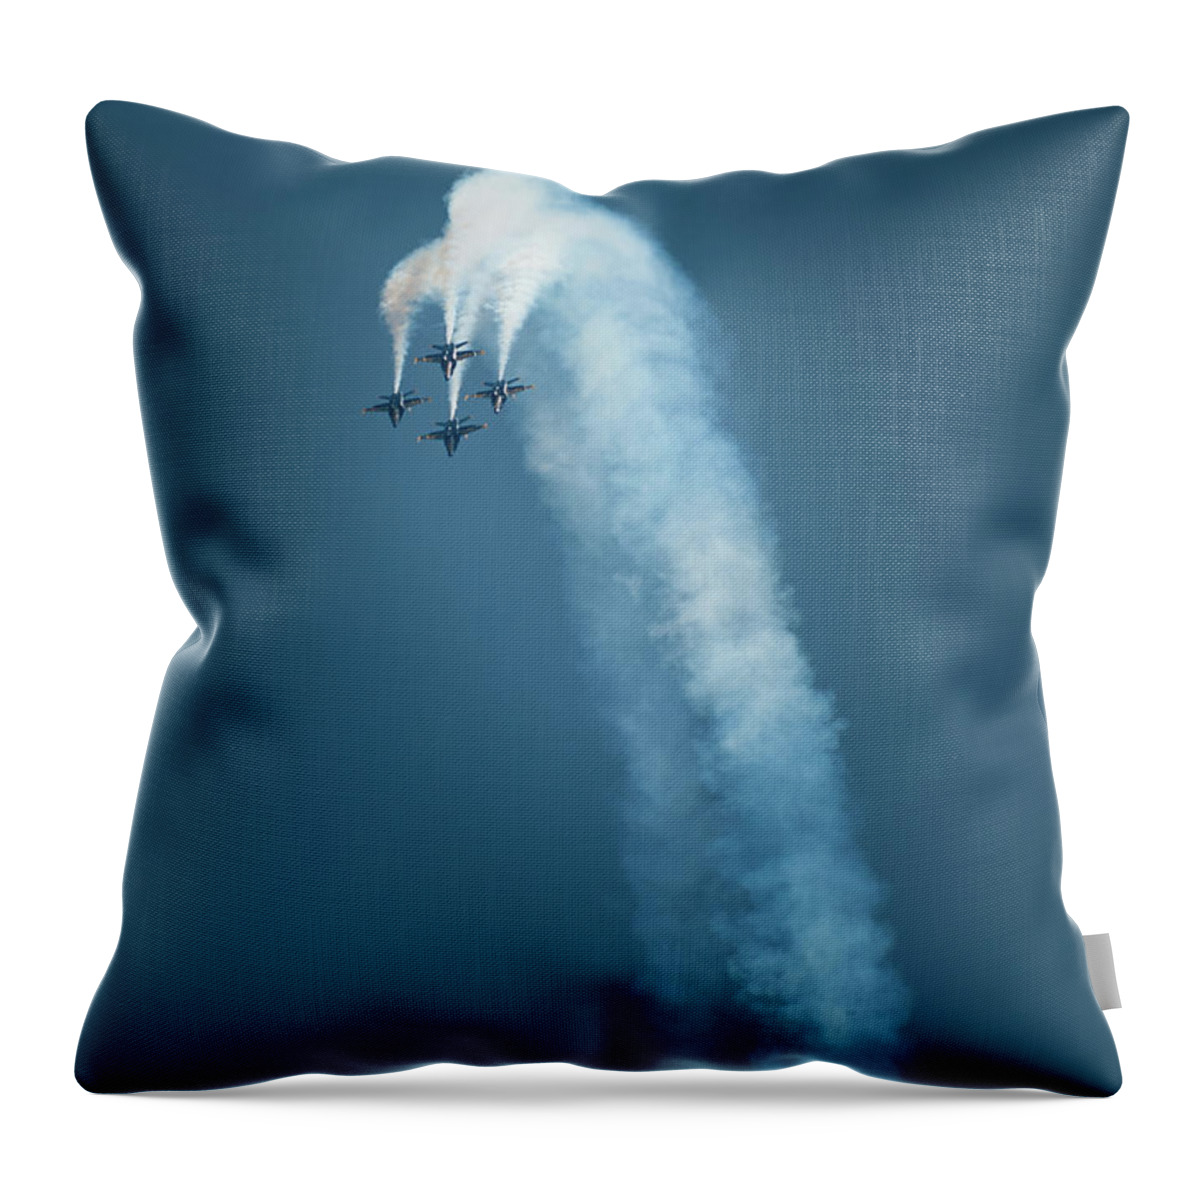 Blue Angels Throw Pillow featuring the photograph Barrel Roll by Mark Duehmig